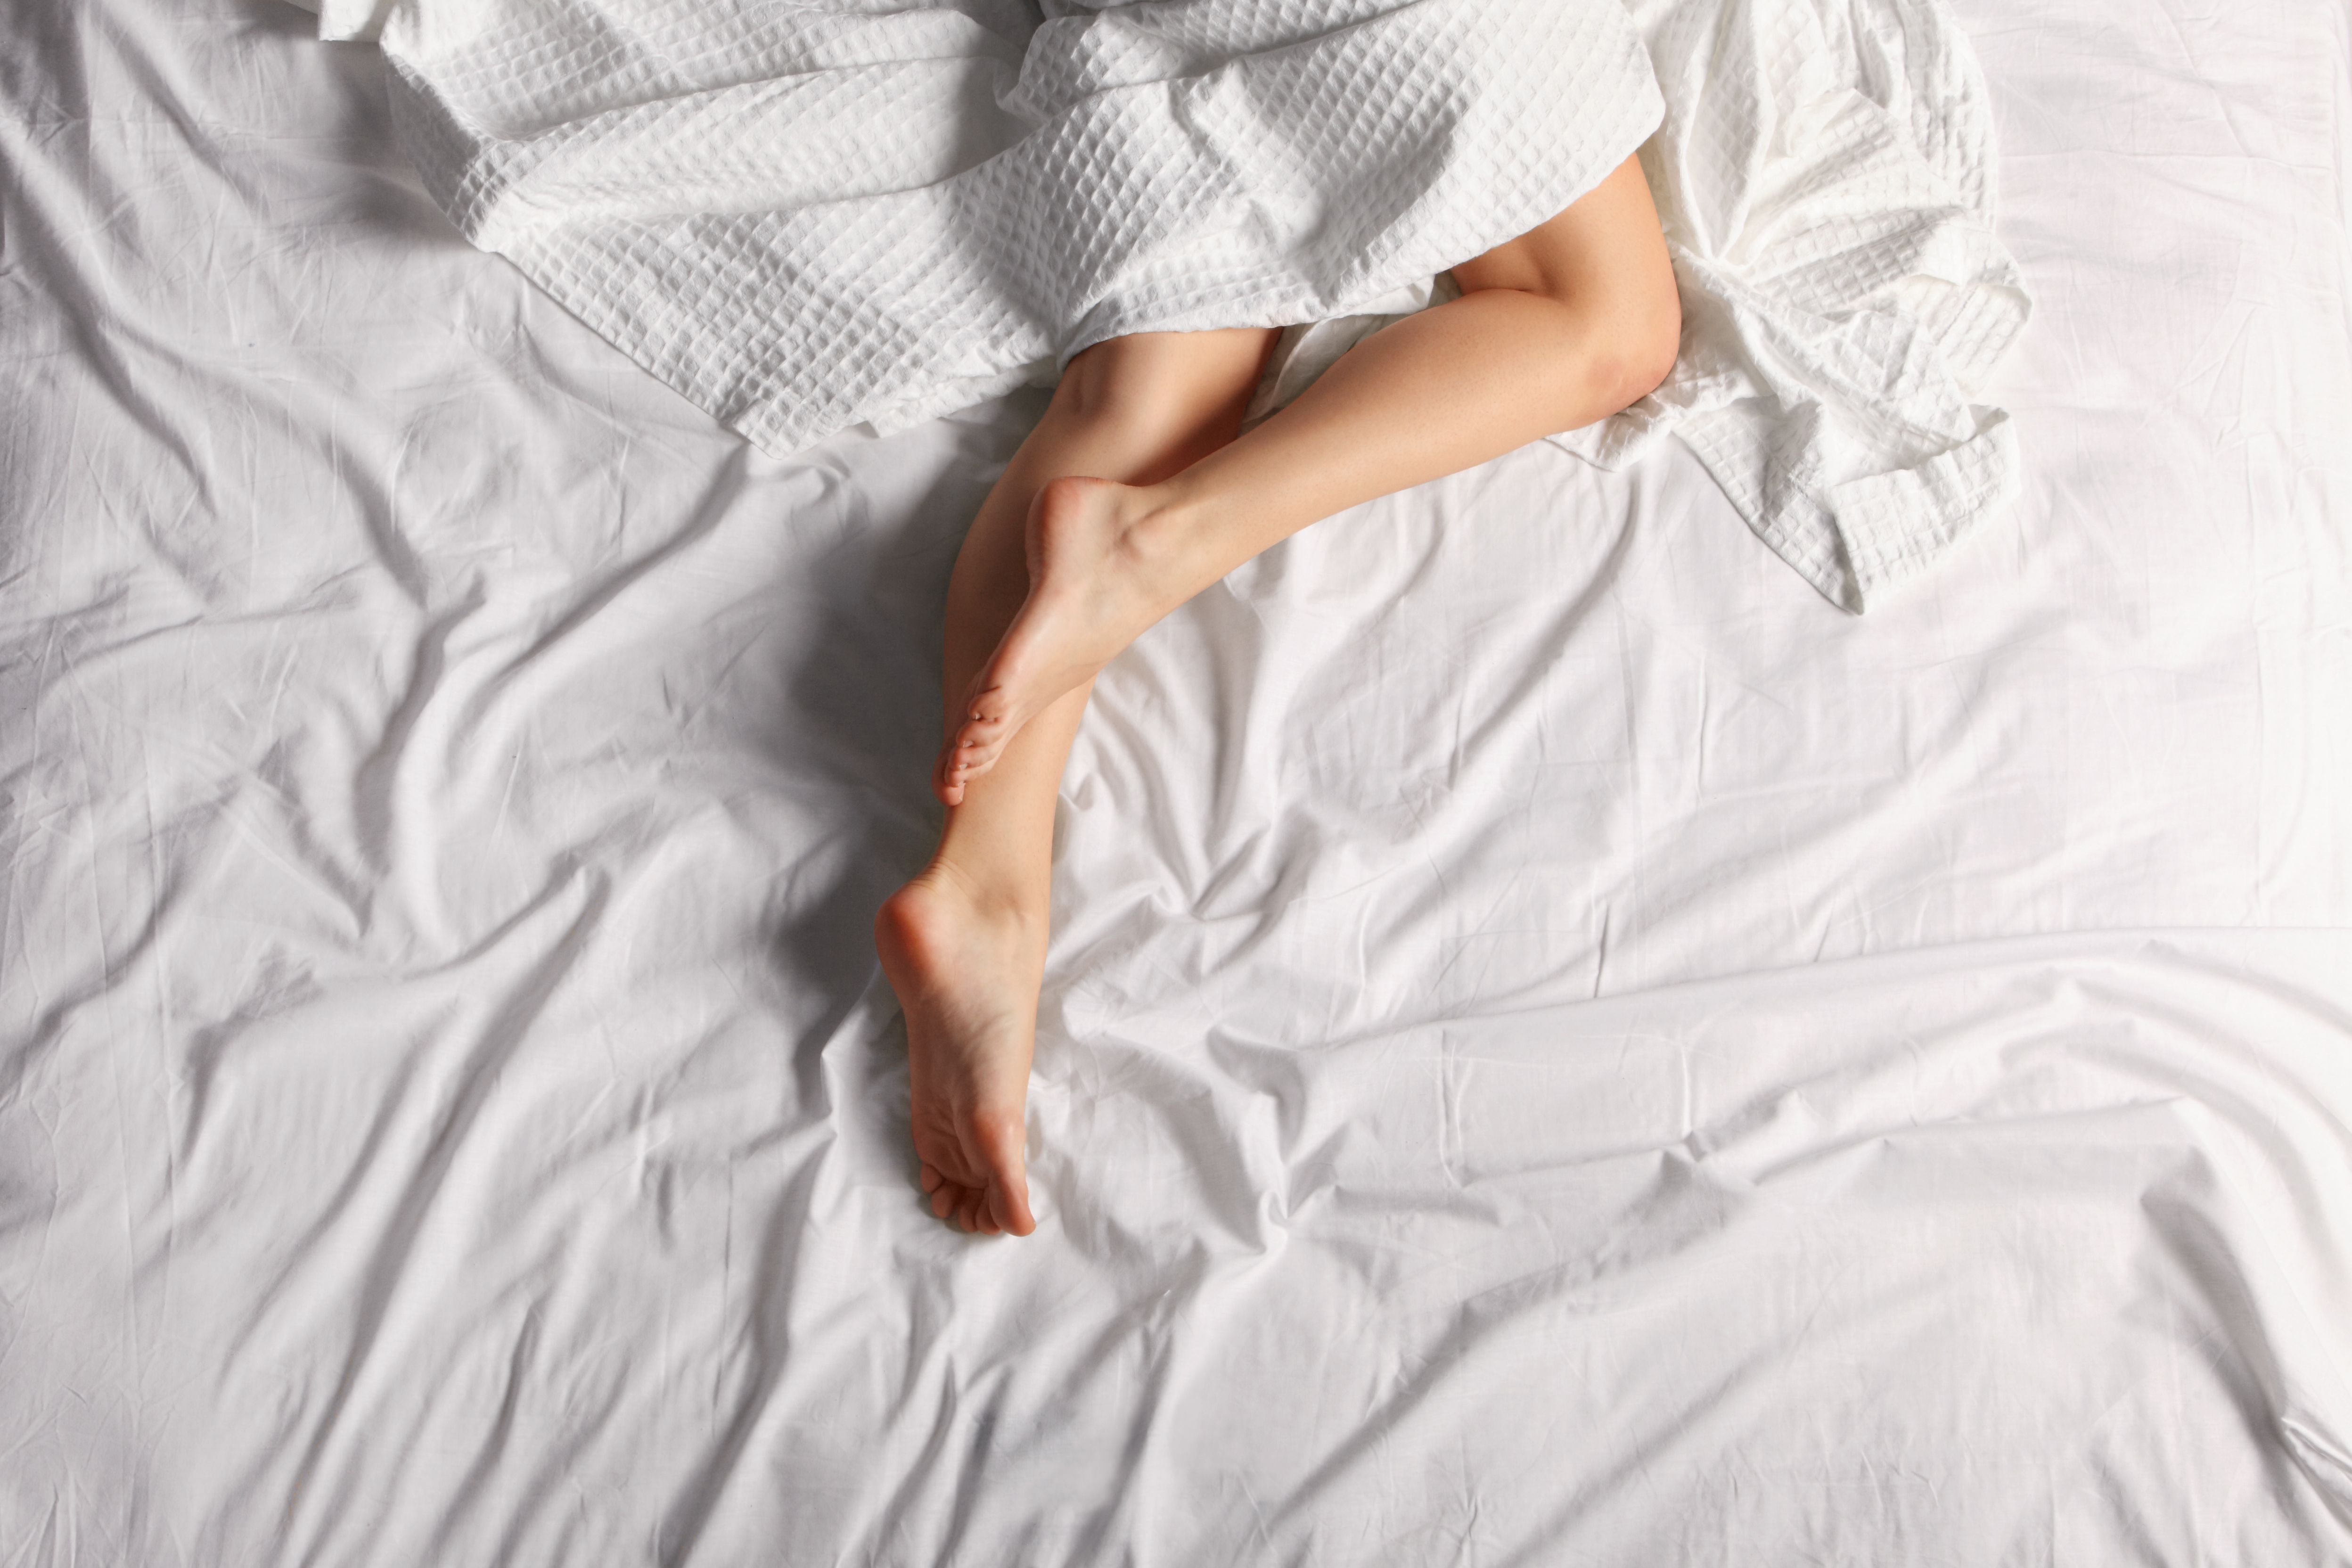 Benefits of Sleeping Naked: 8 Bare Reasons To Go Nude